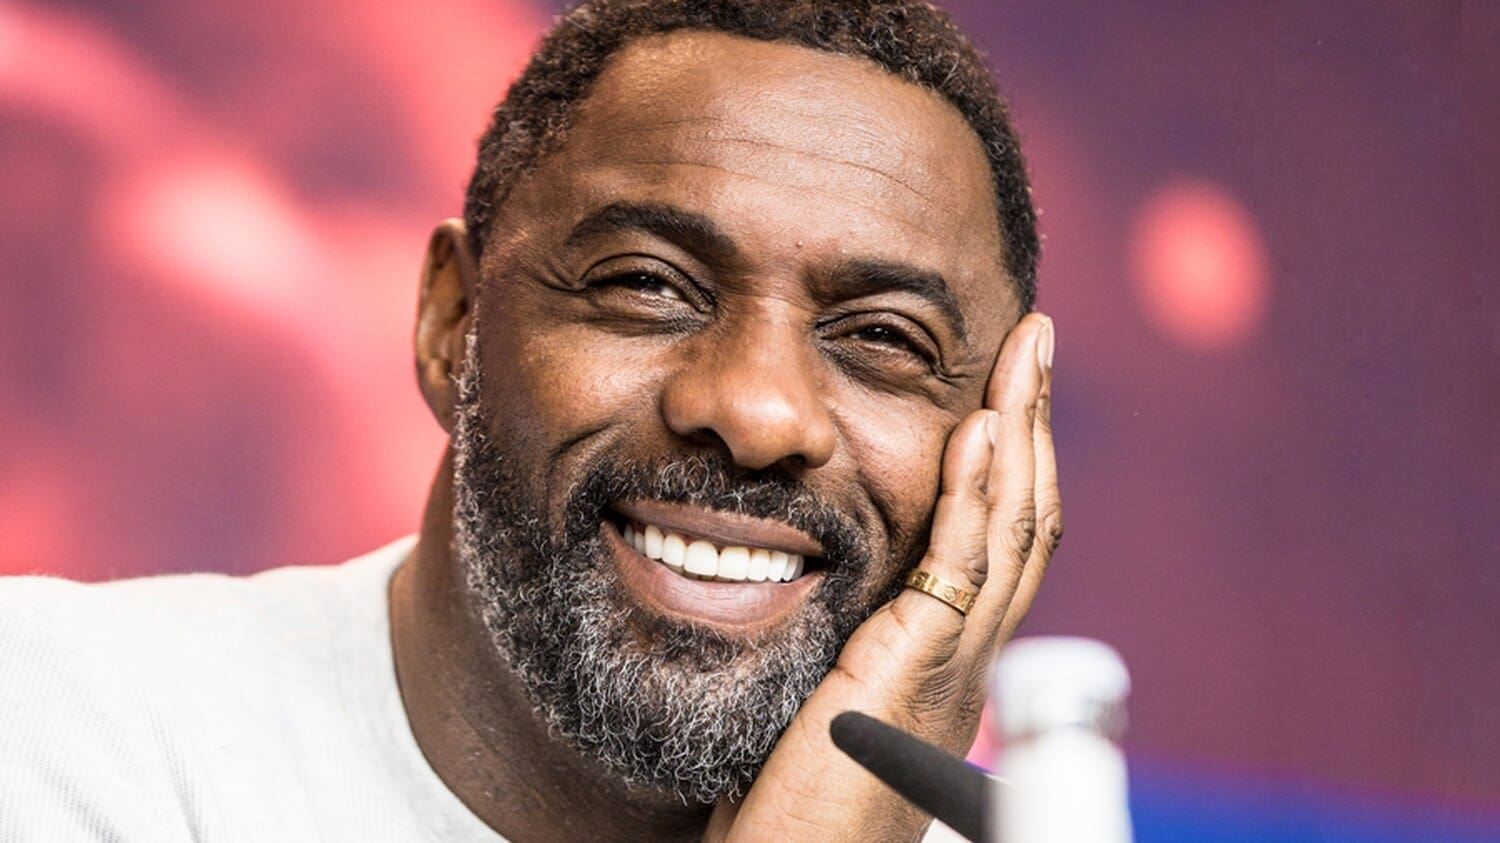 Idris Elba Raises Awareness About Coronavirus And Slams Fake News Claiming That Black People Cannot Get It - See His Video